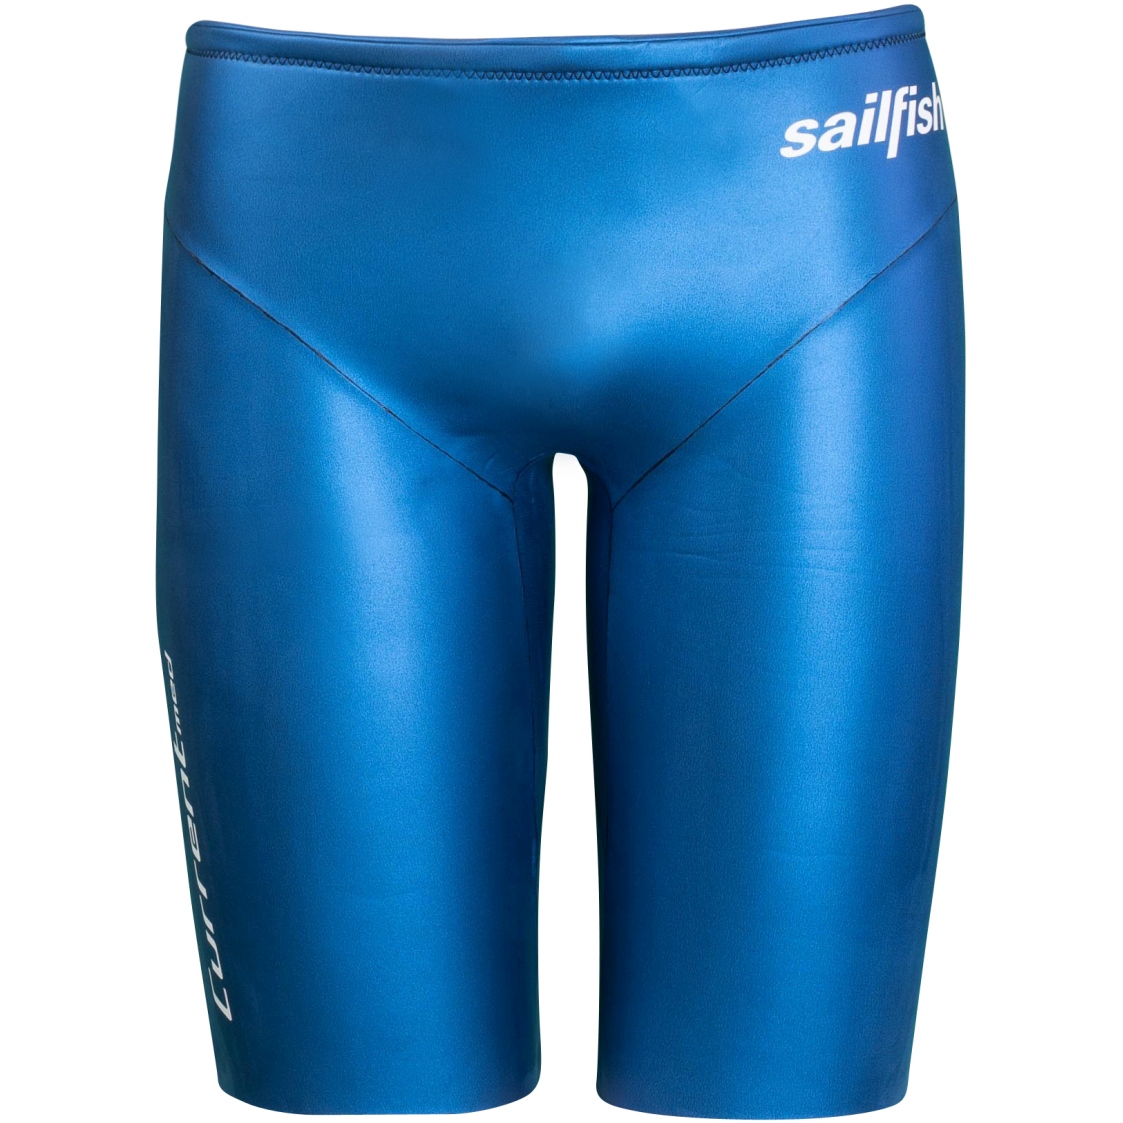 Picture of sailfish Current Med Jammer - blue